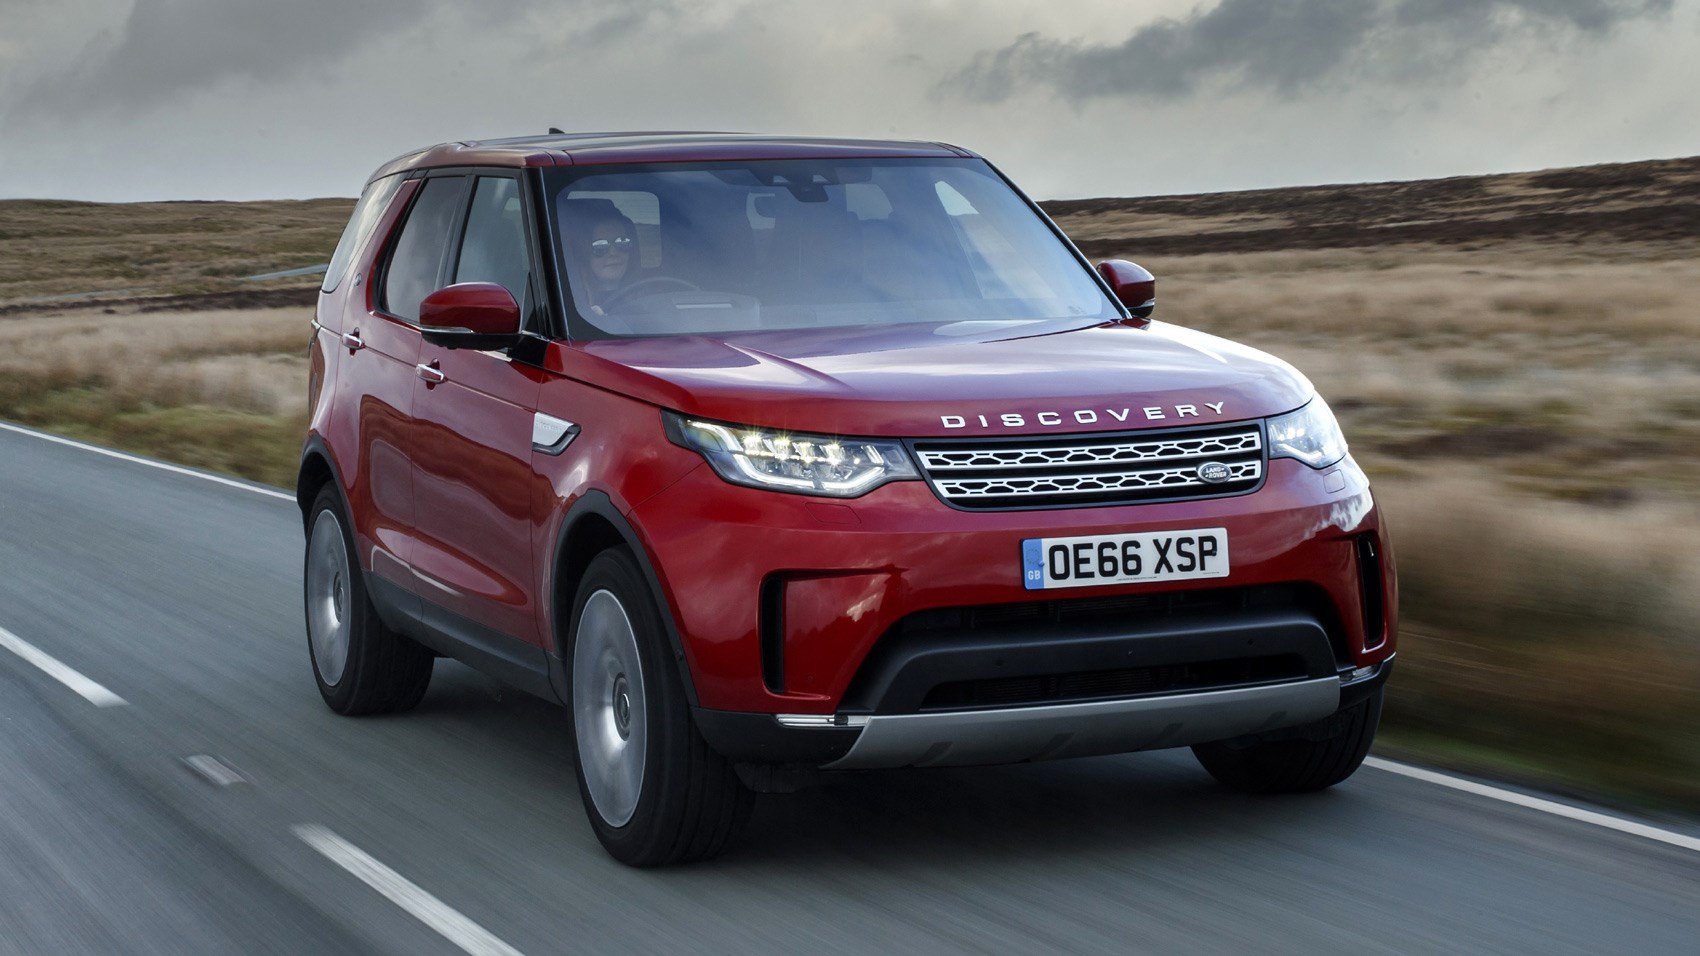 Ело дискавери. Land Rover Discovery sd4. Land Rover Discovery 4 2017. Дискавери 4 2017.